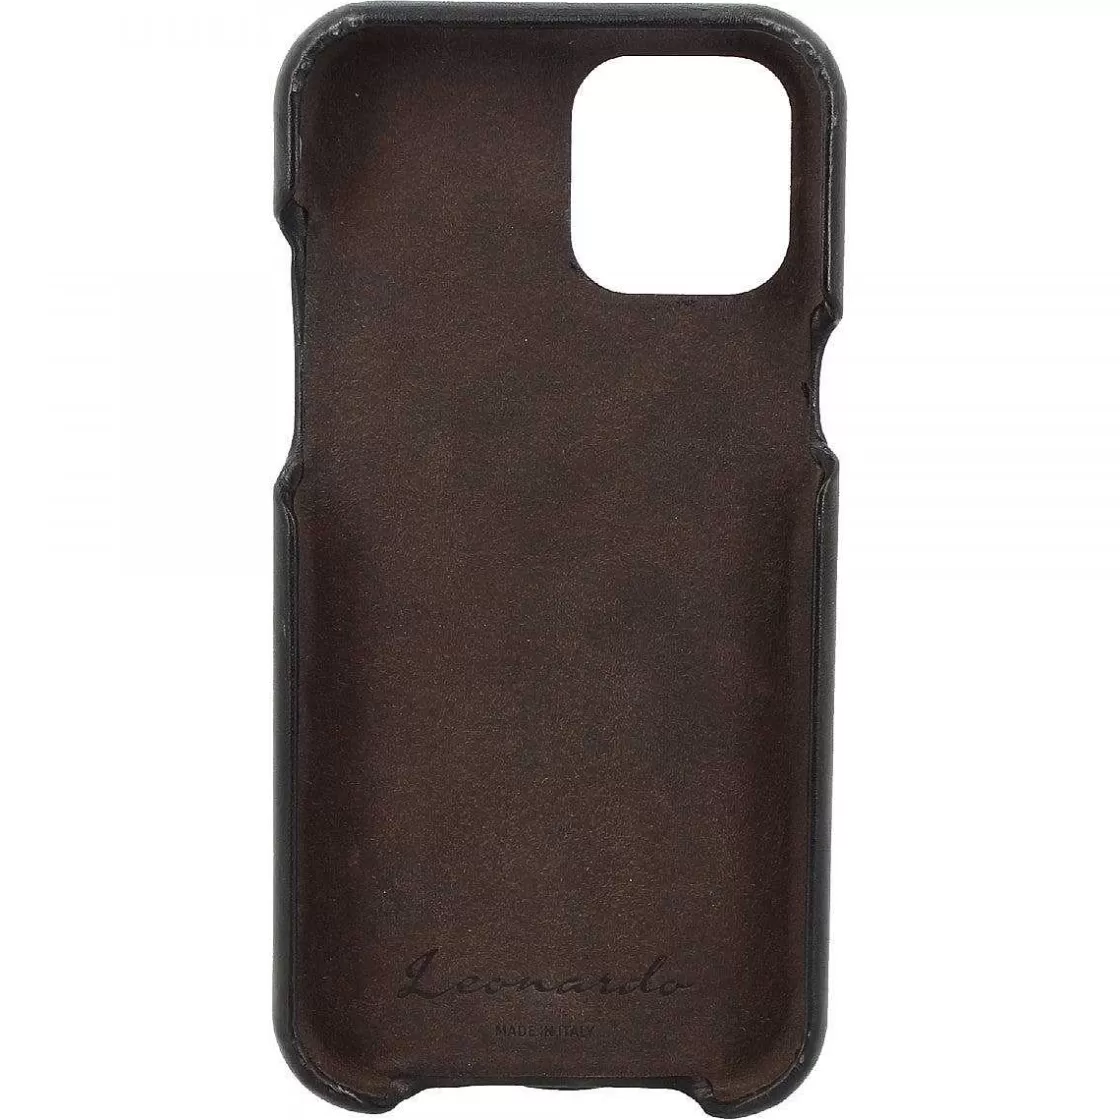 Leonardo Iphone Cover In Hand-Buffered Black Leather Sale